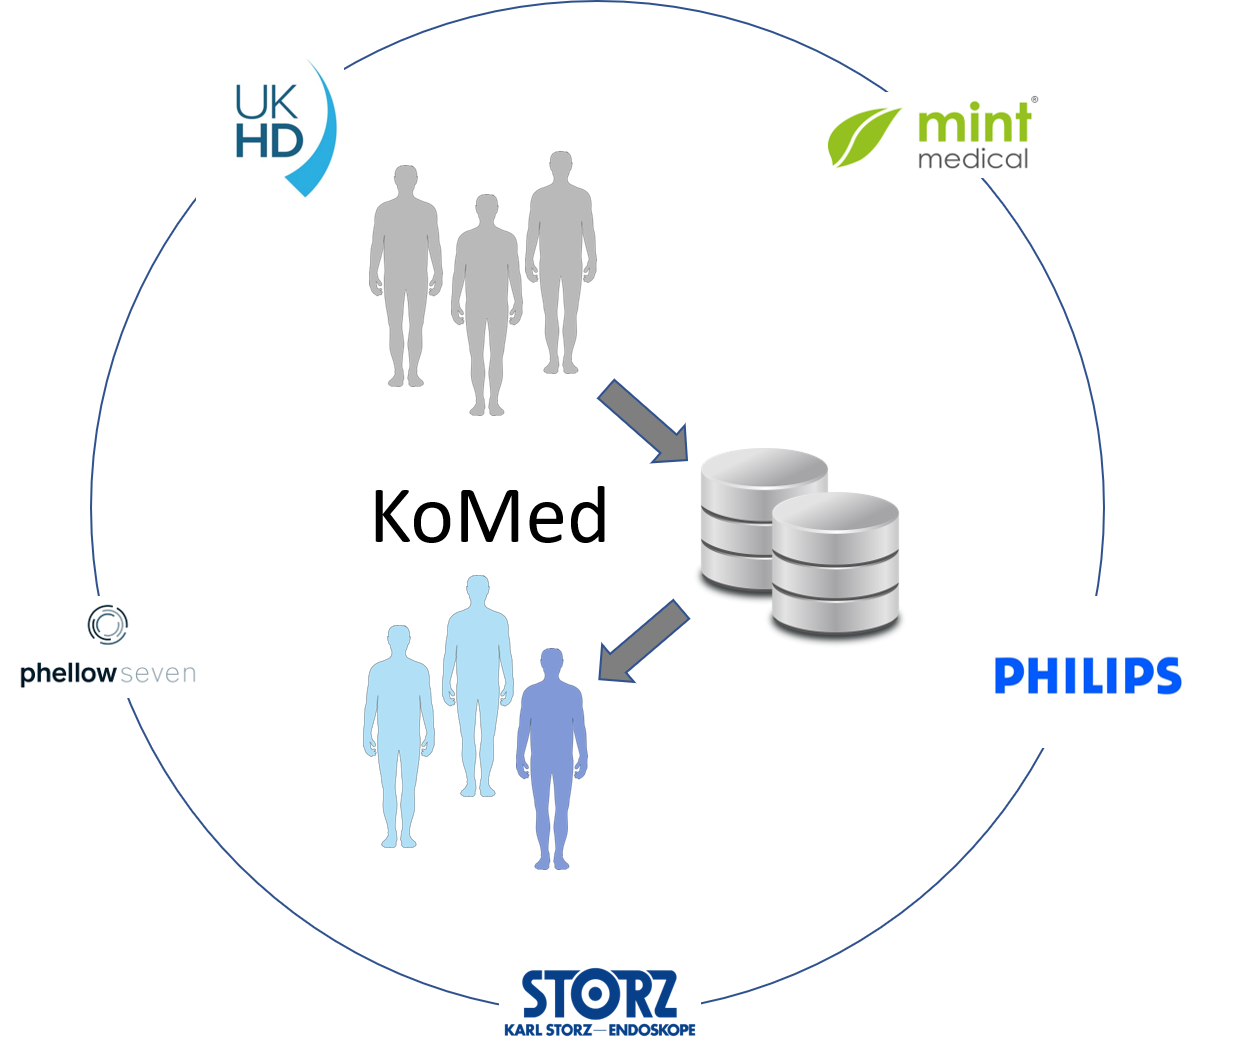 Diagram containing the KoMed in the middle, represented by slices stacked on top of each other. An arrow runs from three grey-coloured human outlines to the KoMed and from this to blue-coloured individuals. The partners involved (UK HD, mint medical, PHILIPS, KARL STORZ, phellow seven) are arranged in a circle around it.